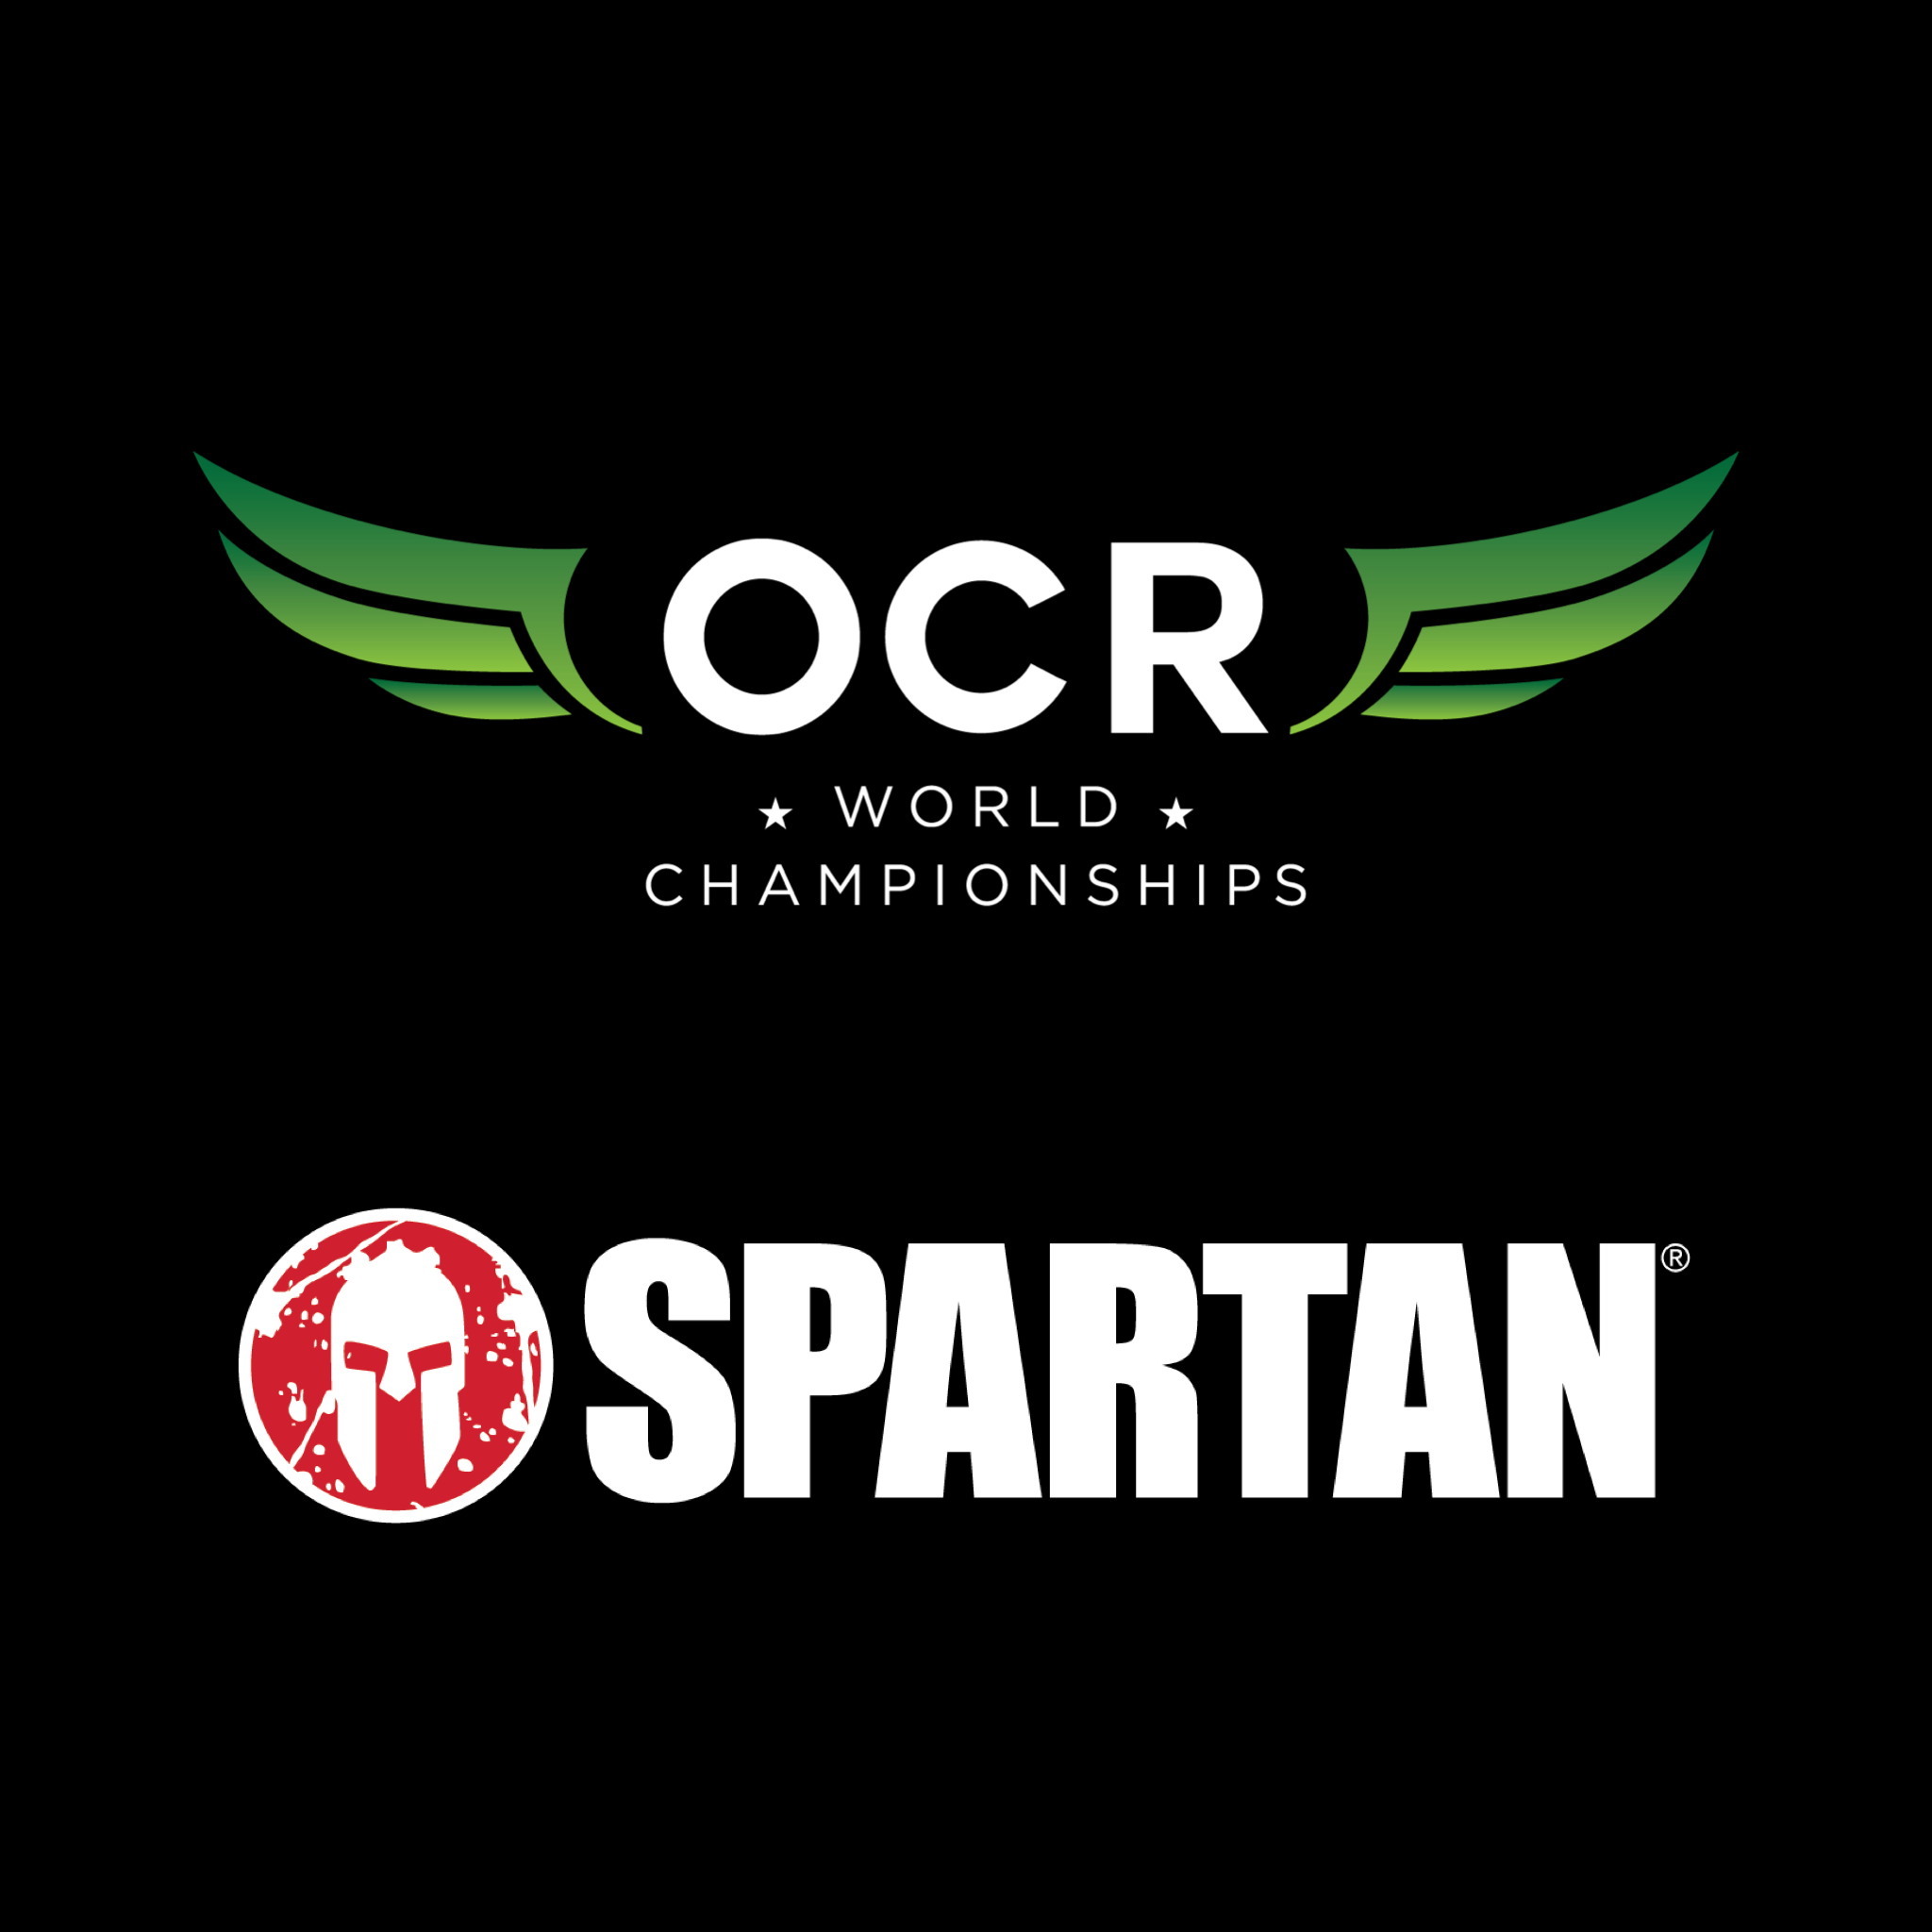 OCR World Championships and Spartan to Collaborate in 2023